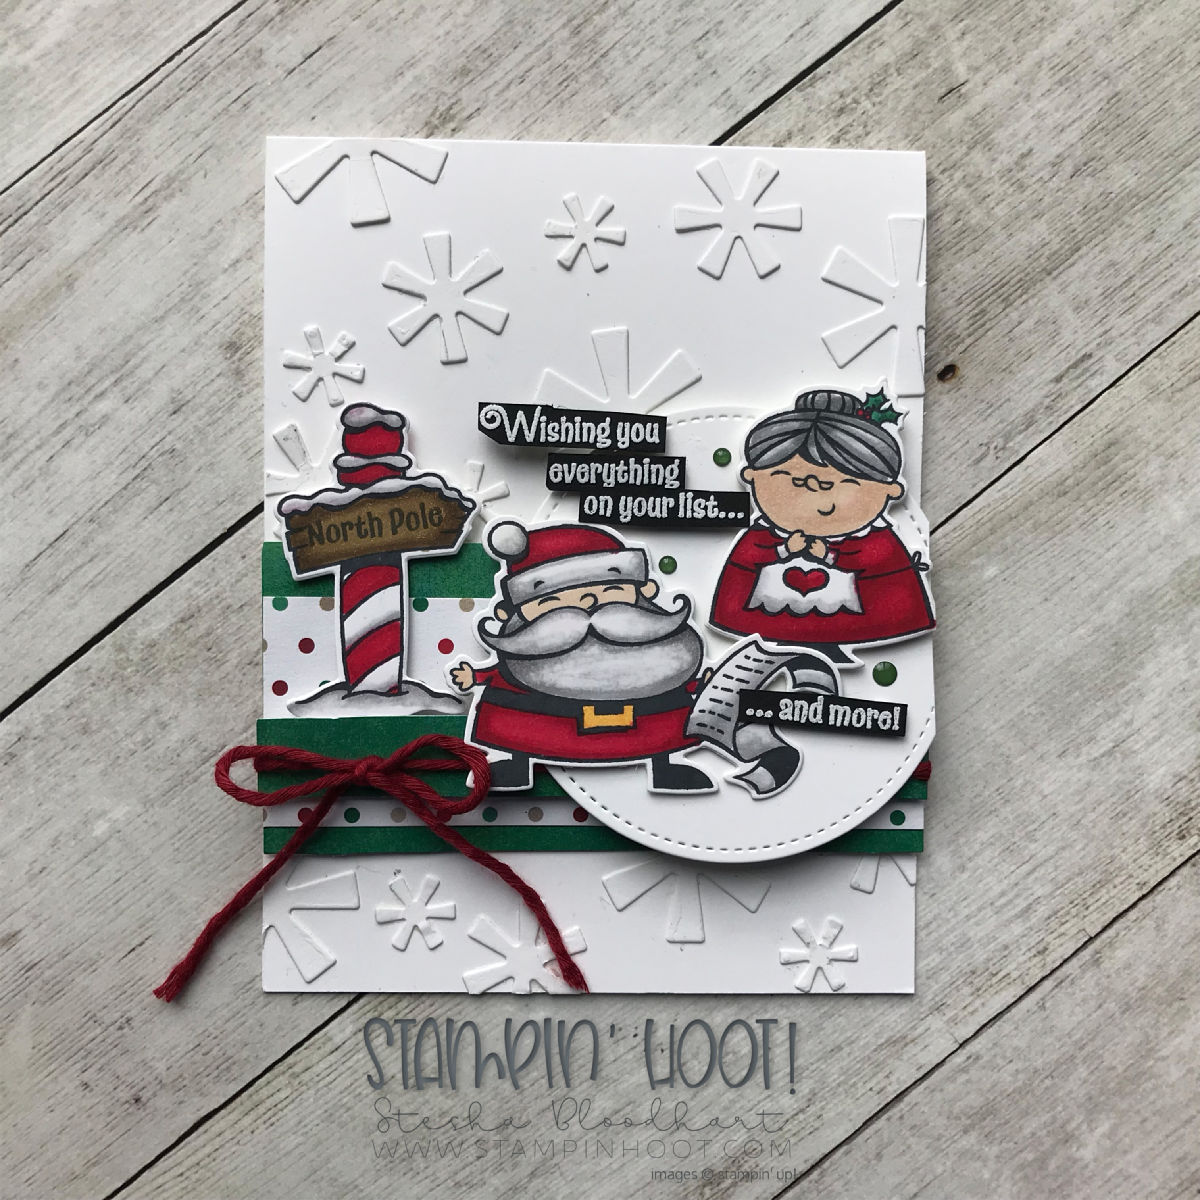 Signs of Santa Bundle by Stampin' Up! Holiday Card created by Stesha Bloodhart, Stampin' Hoot! #steshabloodhart #stampinhoot